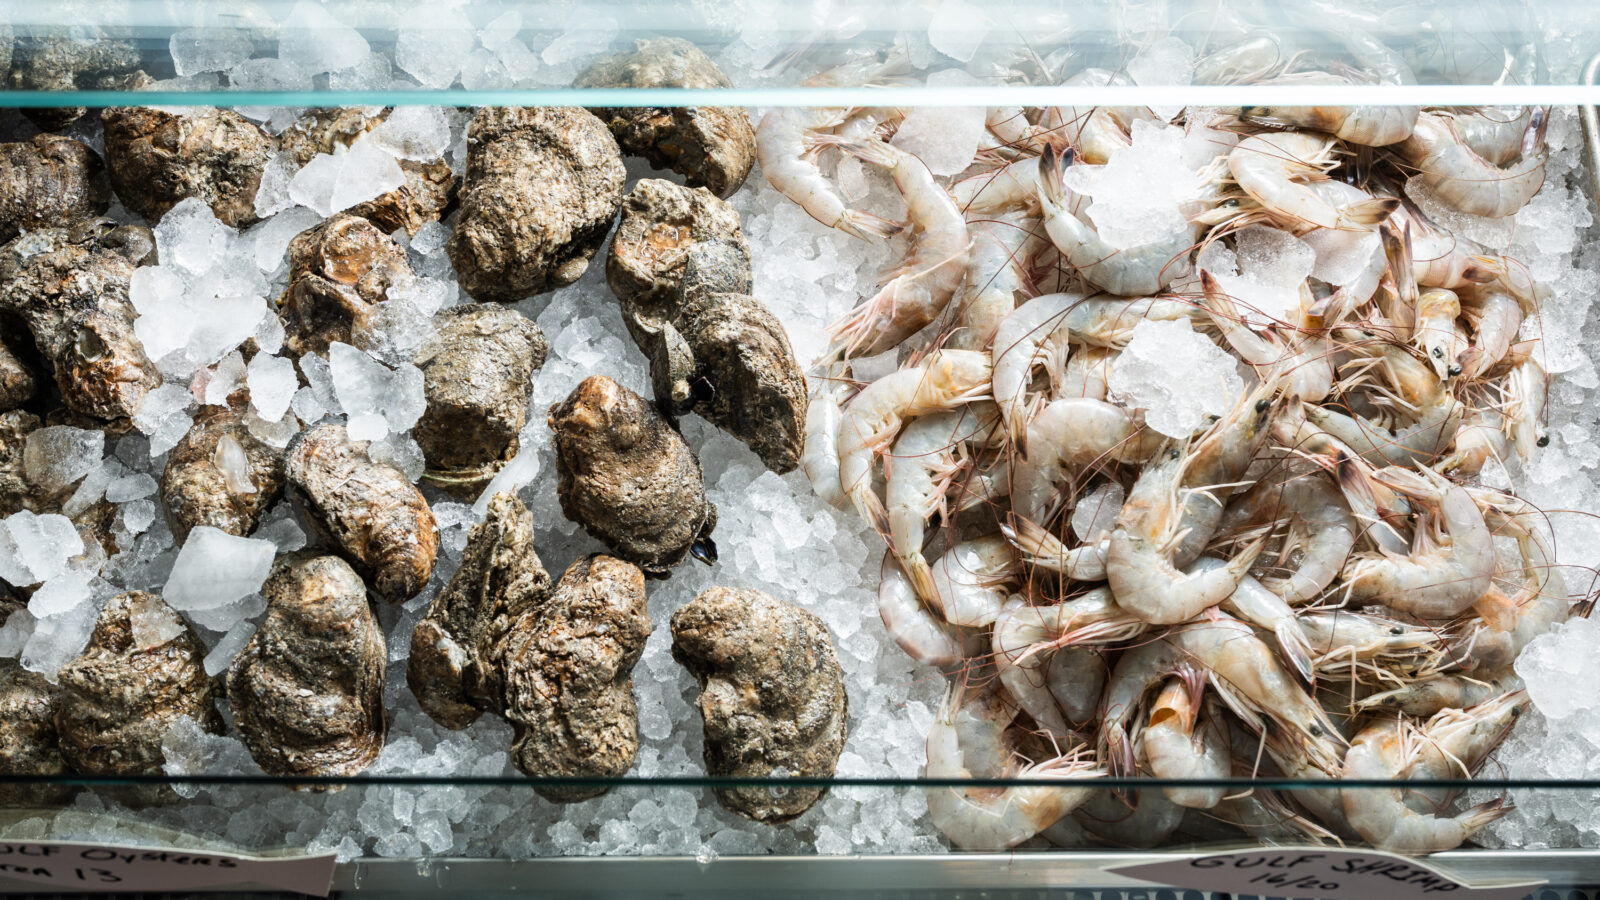 A display of fresh shrimp and oysters over ice.